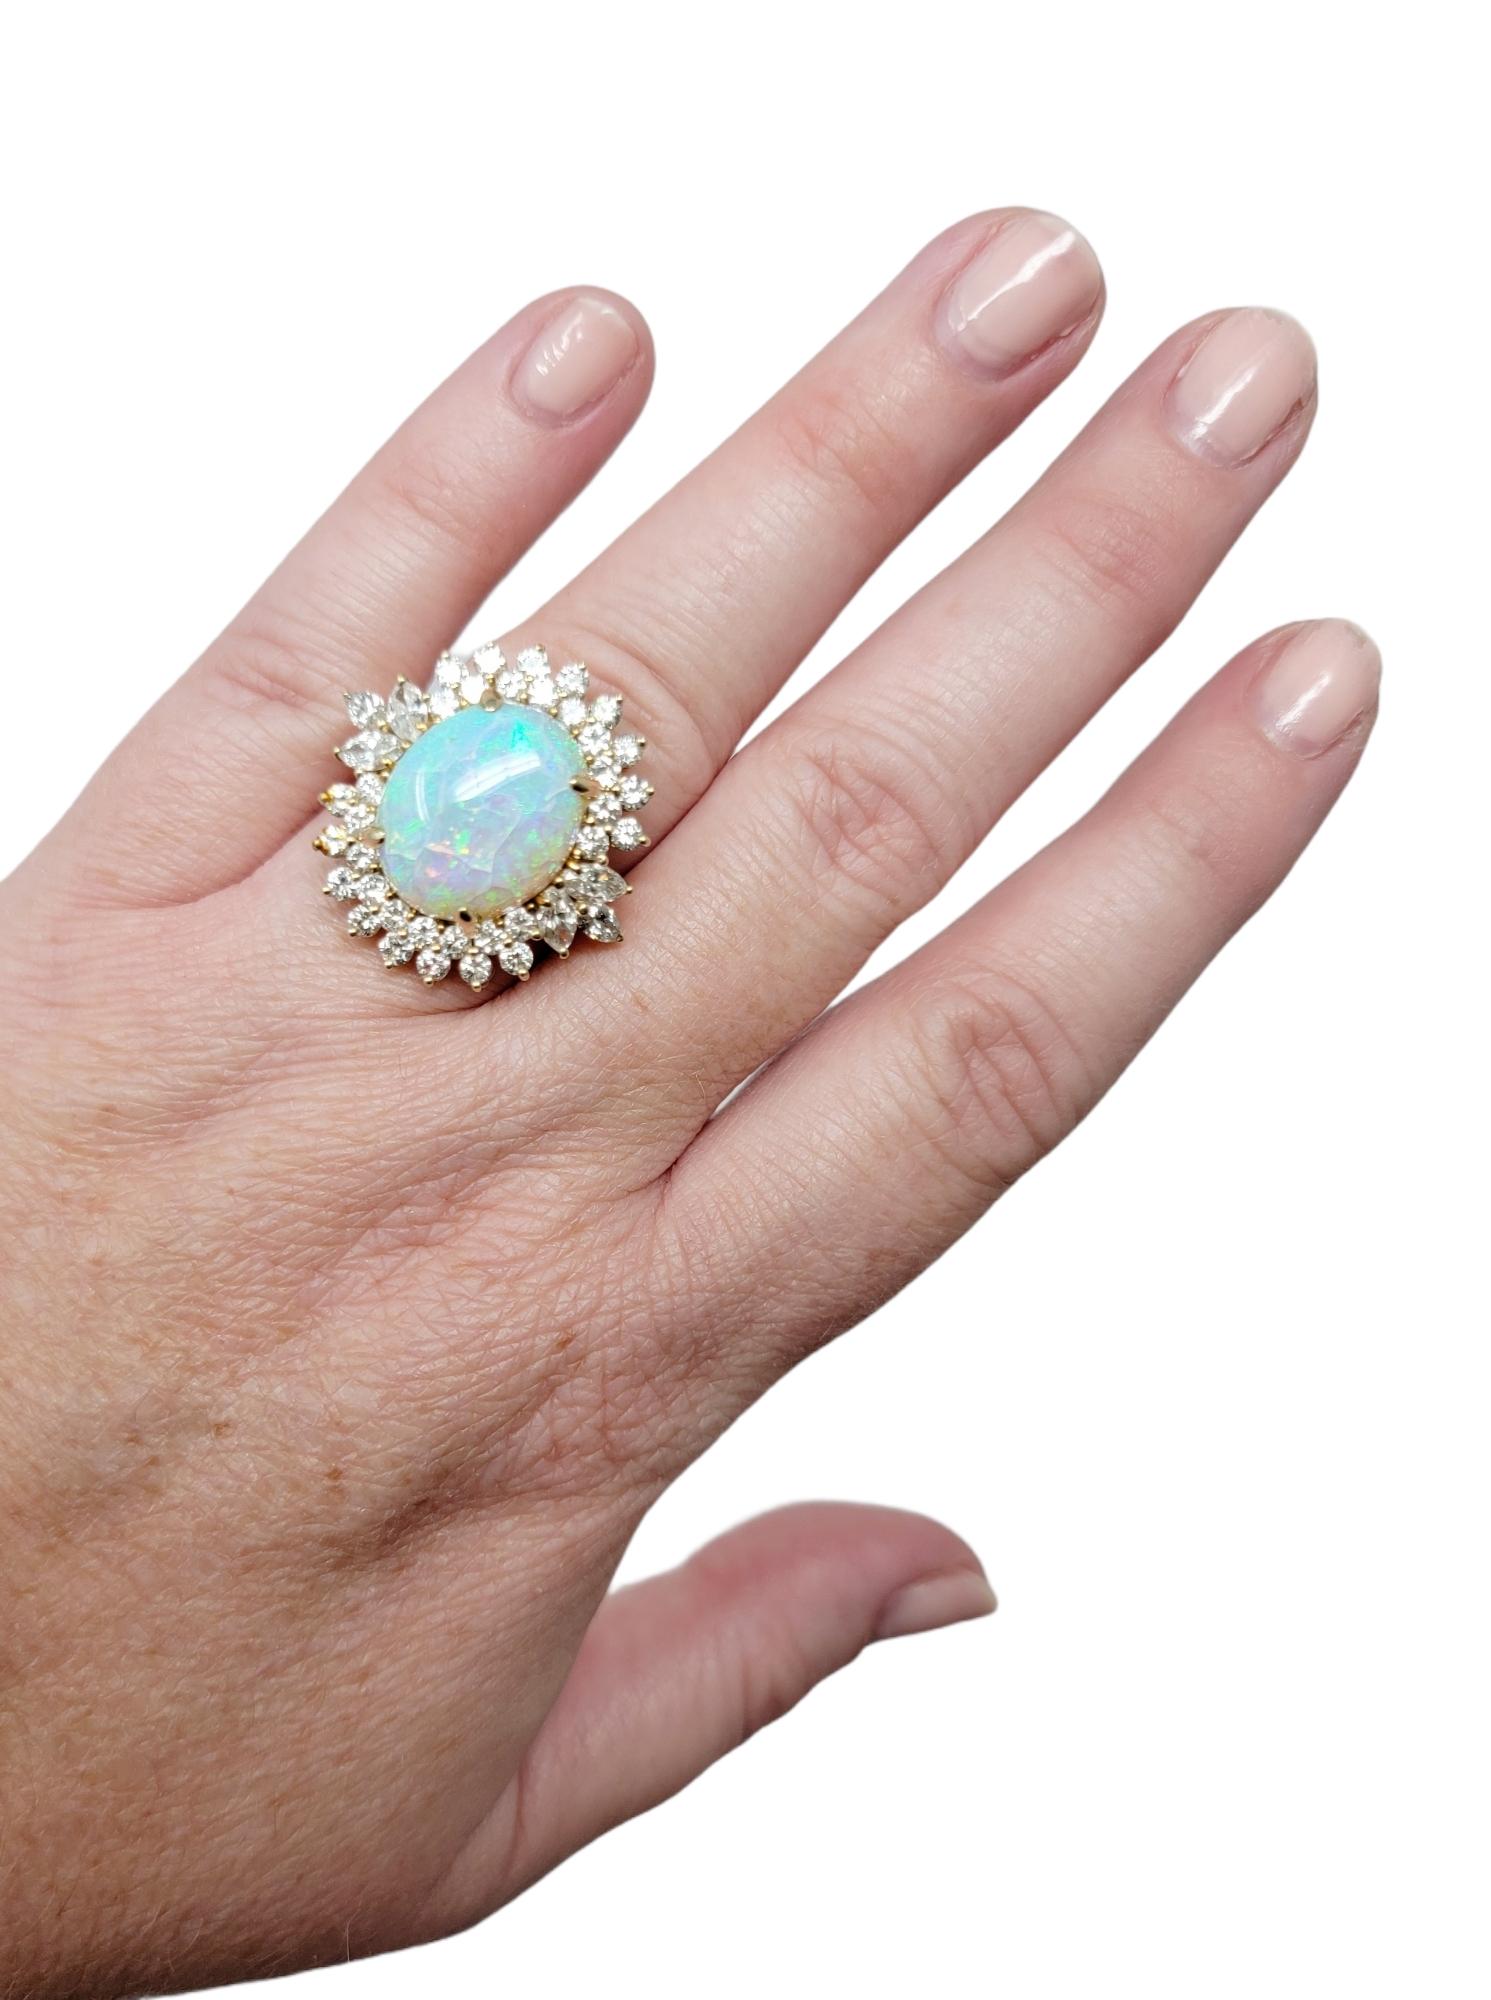 7.55 Carats Total Opal Cabochon and Diamond Halo Ring in 14 Karat Yellow Gold For Sale 9